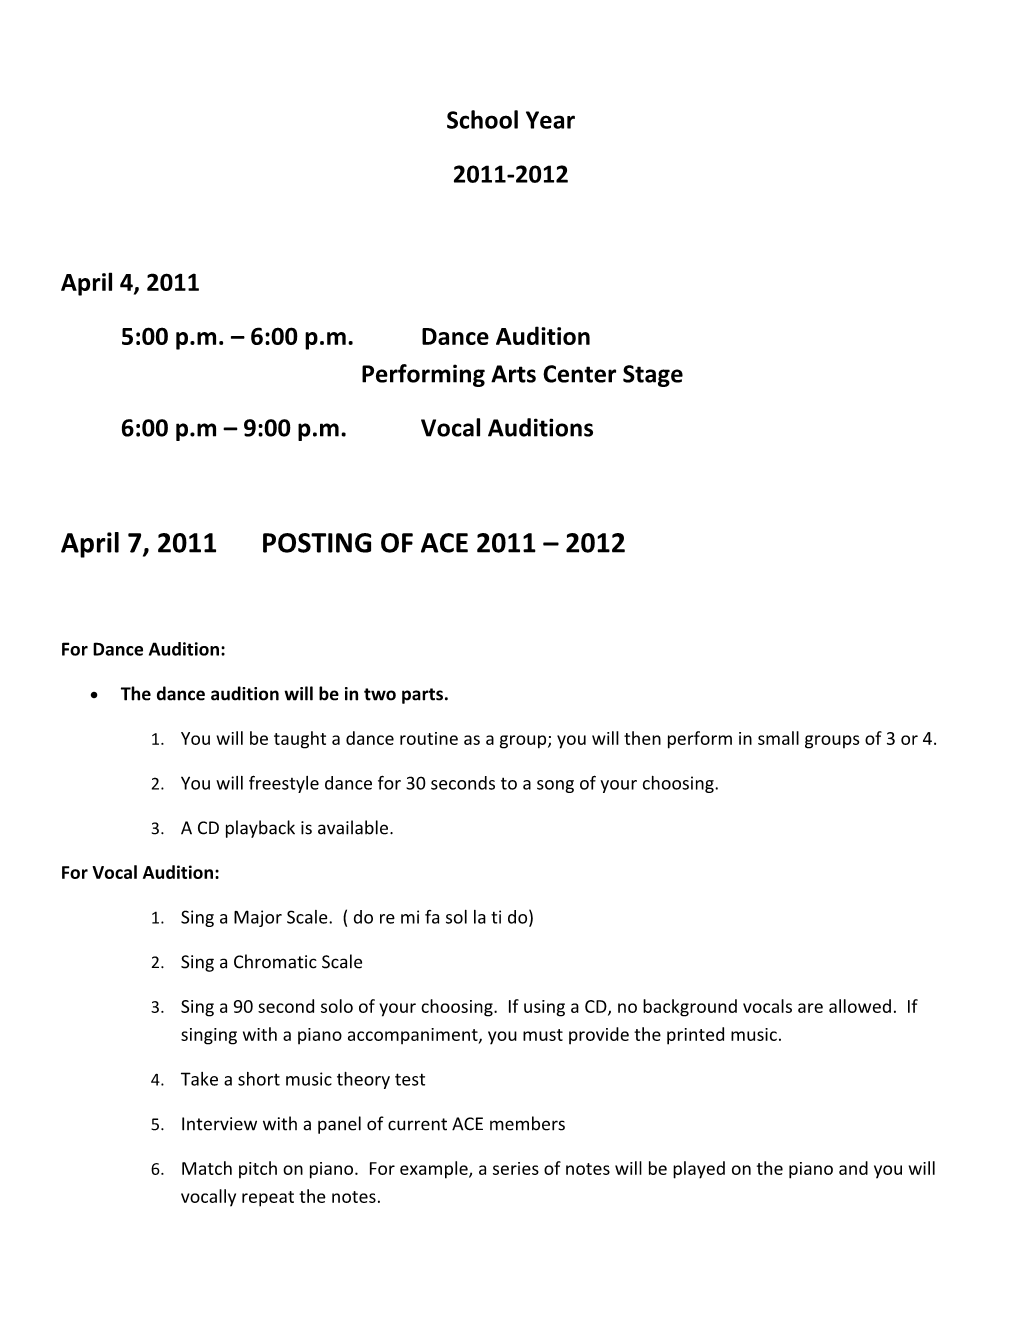 5:00 P.M. 6:00 P.M. Dance Audition Performing Arts Center Stage